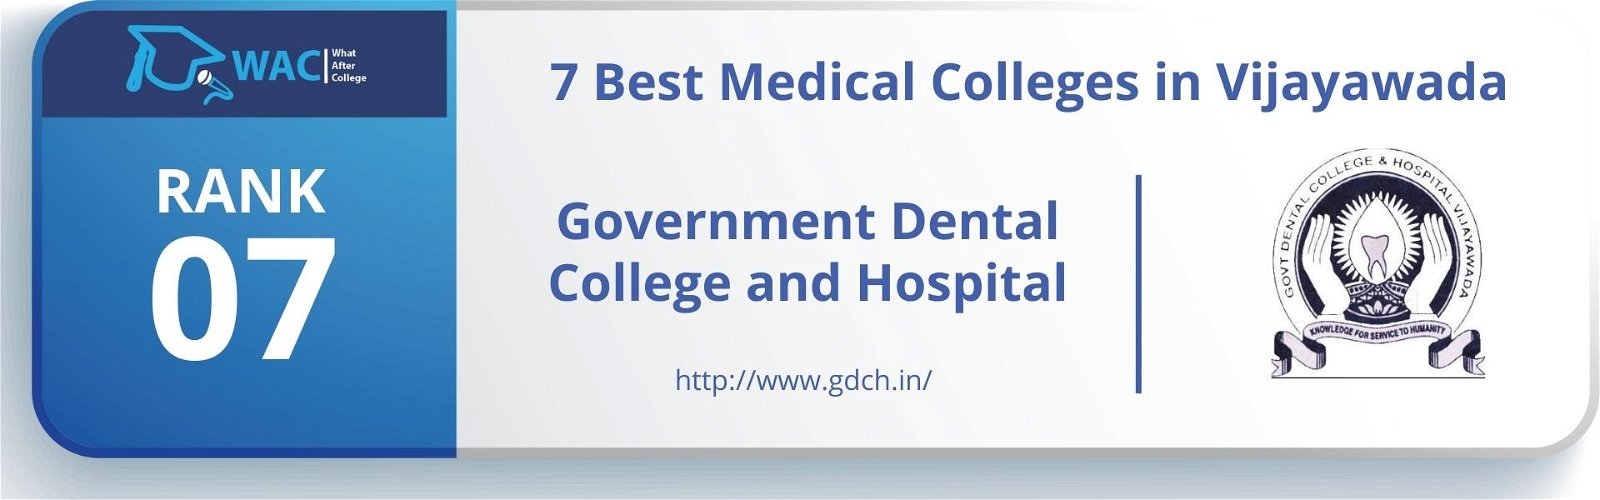 Rank: 7 Government Dental College and Hospital